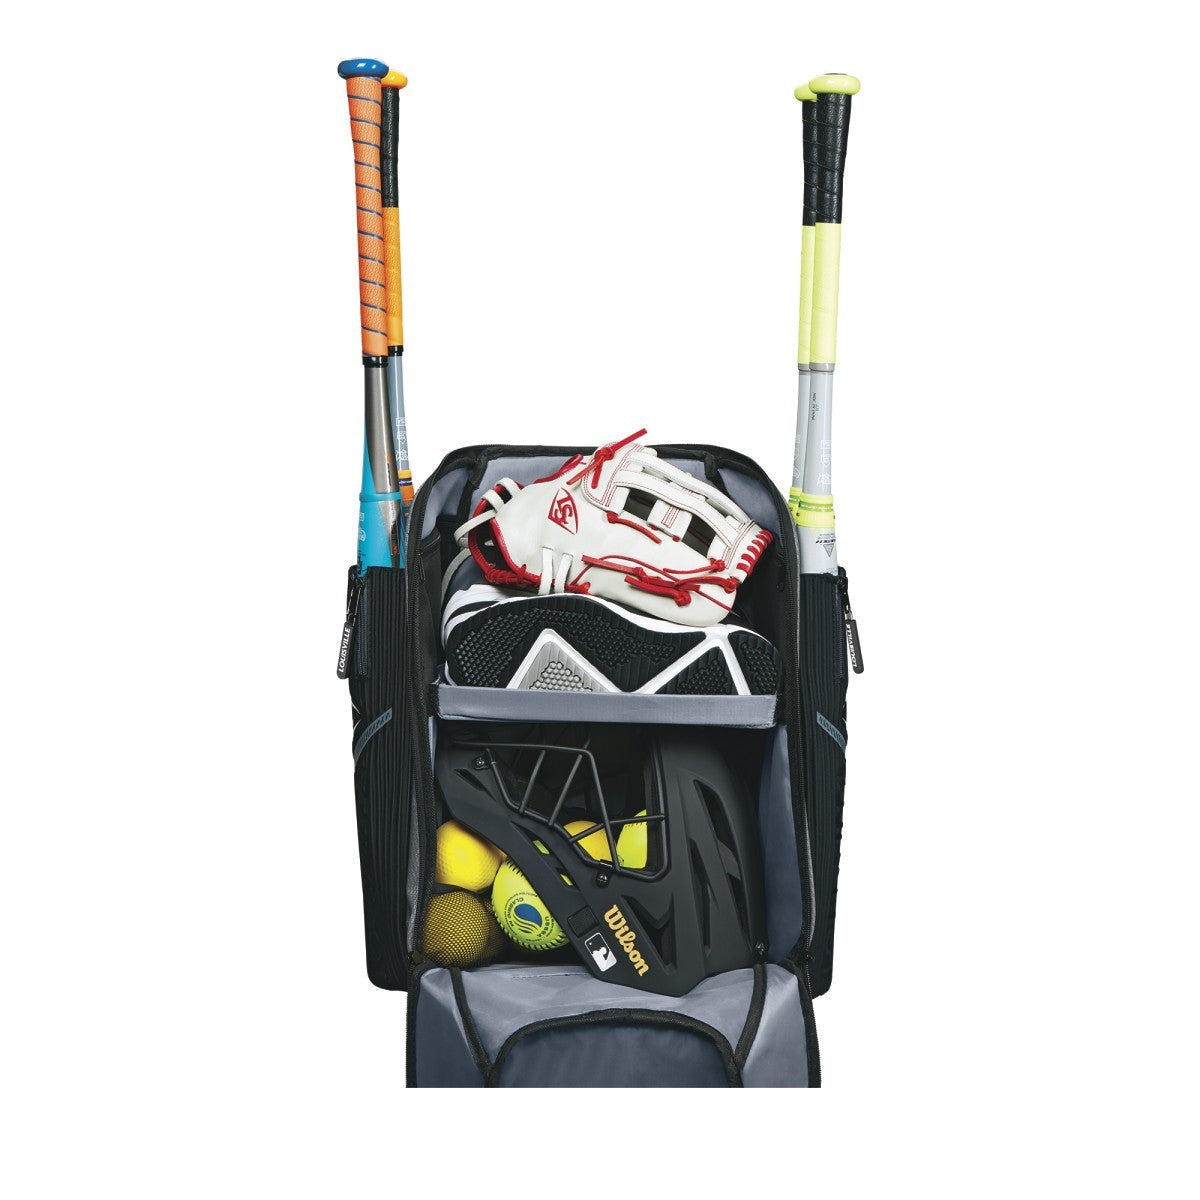 LOUISVILLE SLUGGER SERIES 5 STICK PACK EQUIPMENT RED BACKPACK WTL9501S –  All The Way Live Designs